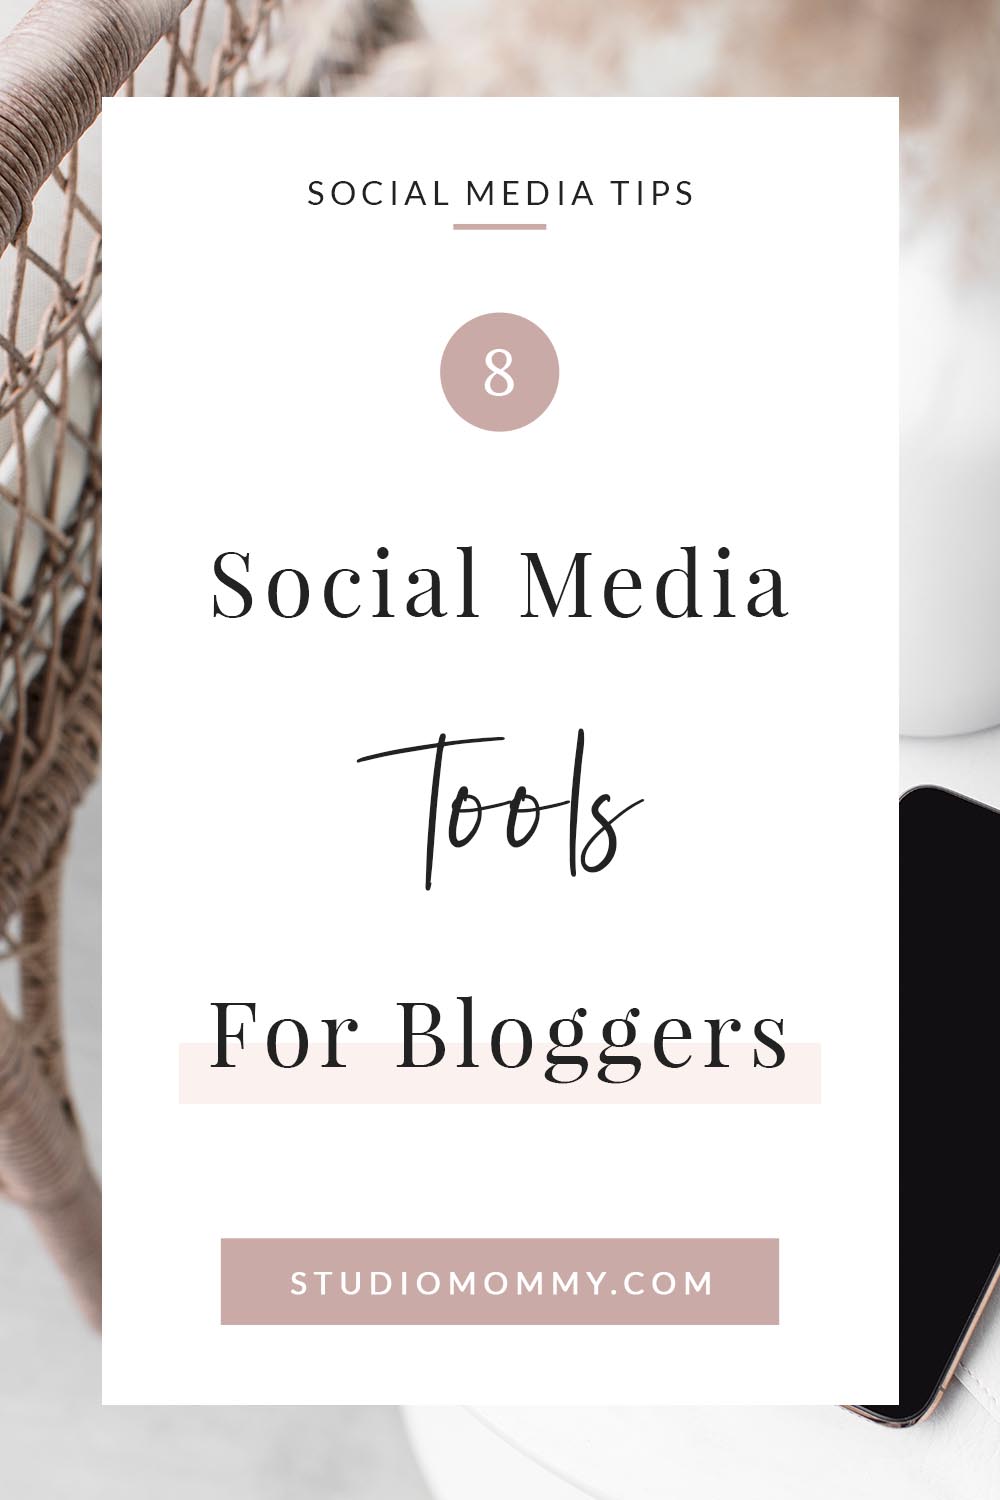 Are you looking for ways to increase your earned media? Do you want simple and effective tools to simplify your job? In this article you’ll discover tools that help you to become more efficient and effective with social media.